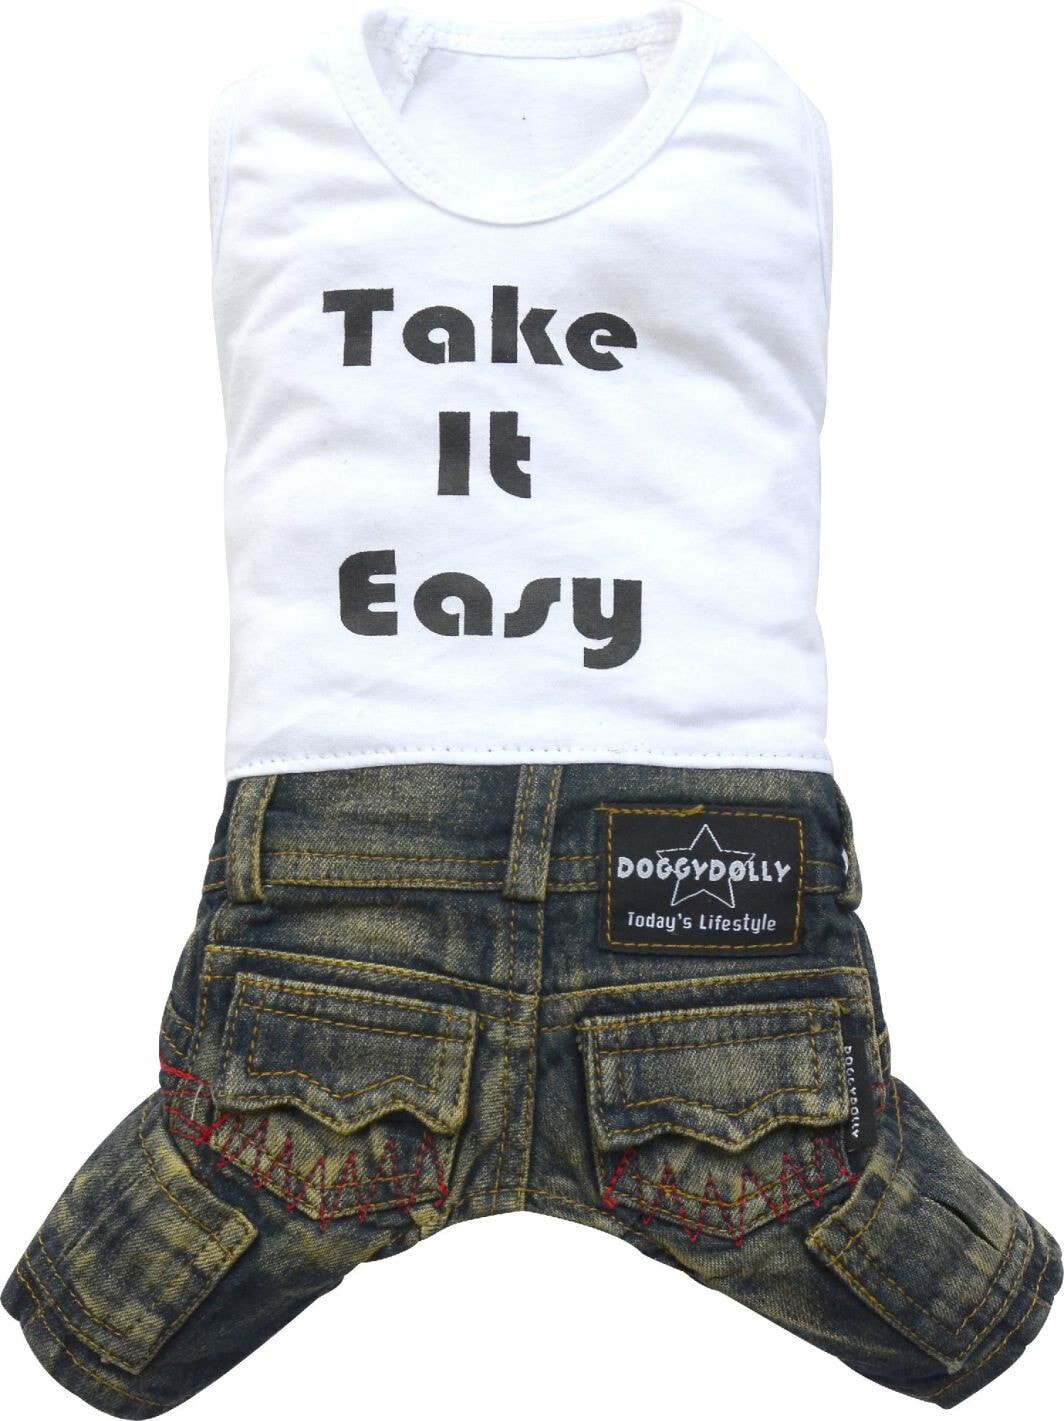 DoggyDolly Jeans set with t-shirt, white, S 23-25cm / 36-38cm